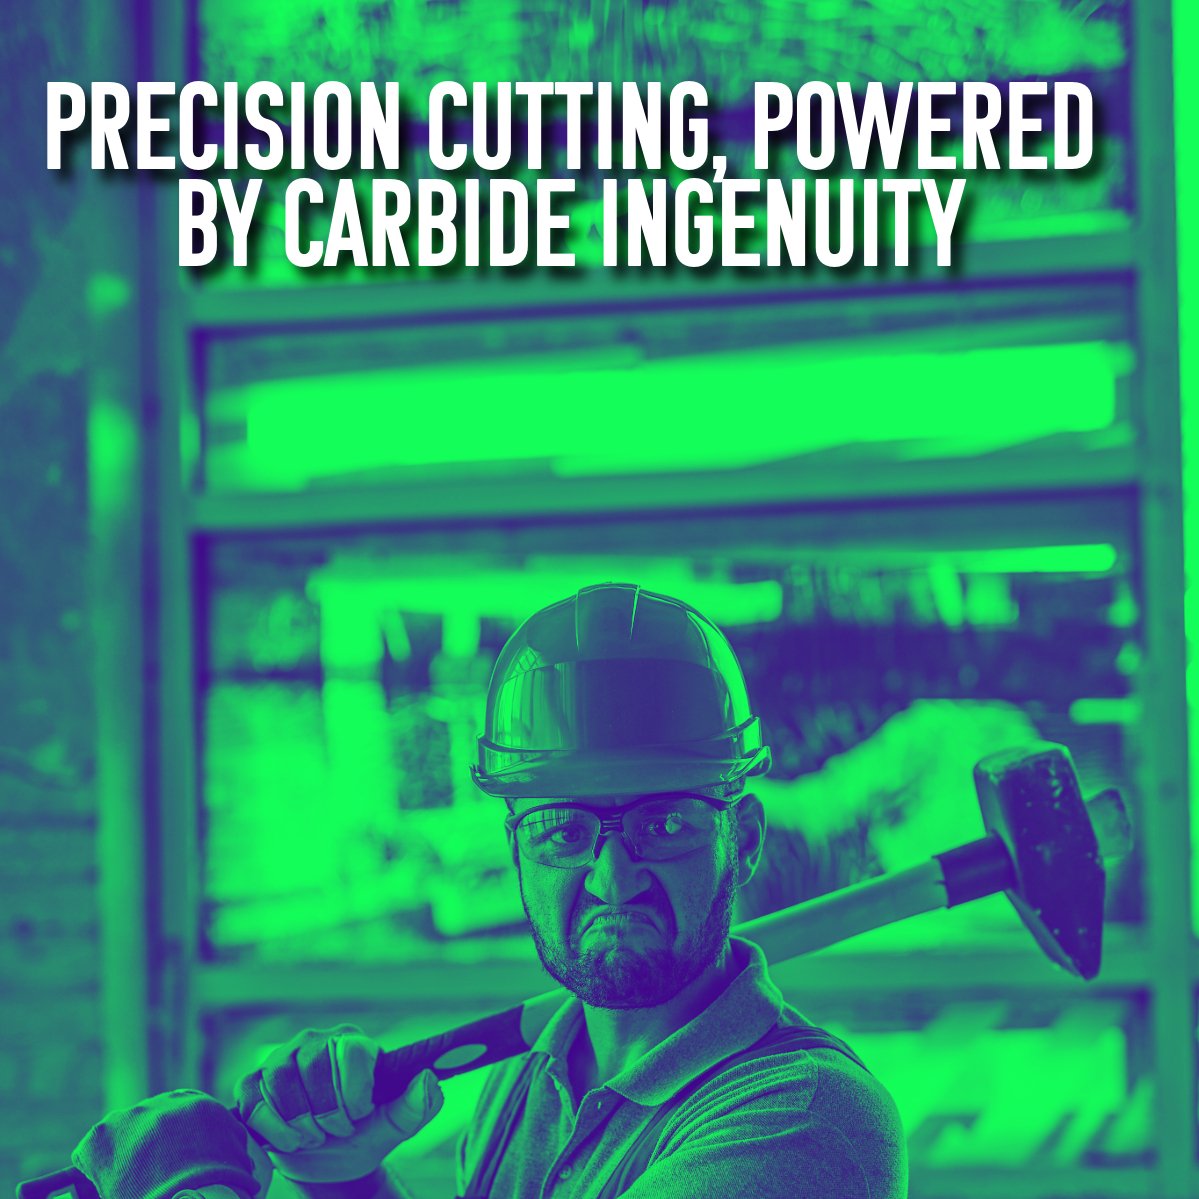 Achieve smooth, precise cuts effortlessly with carbide burr cutting tools, delivering a polished finish every time. #SmoothCuts #PolishedFinish